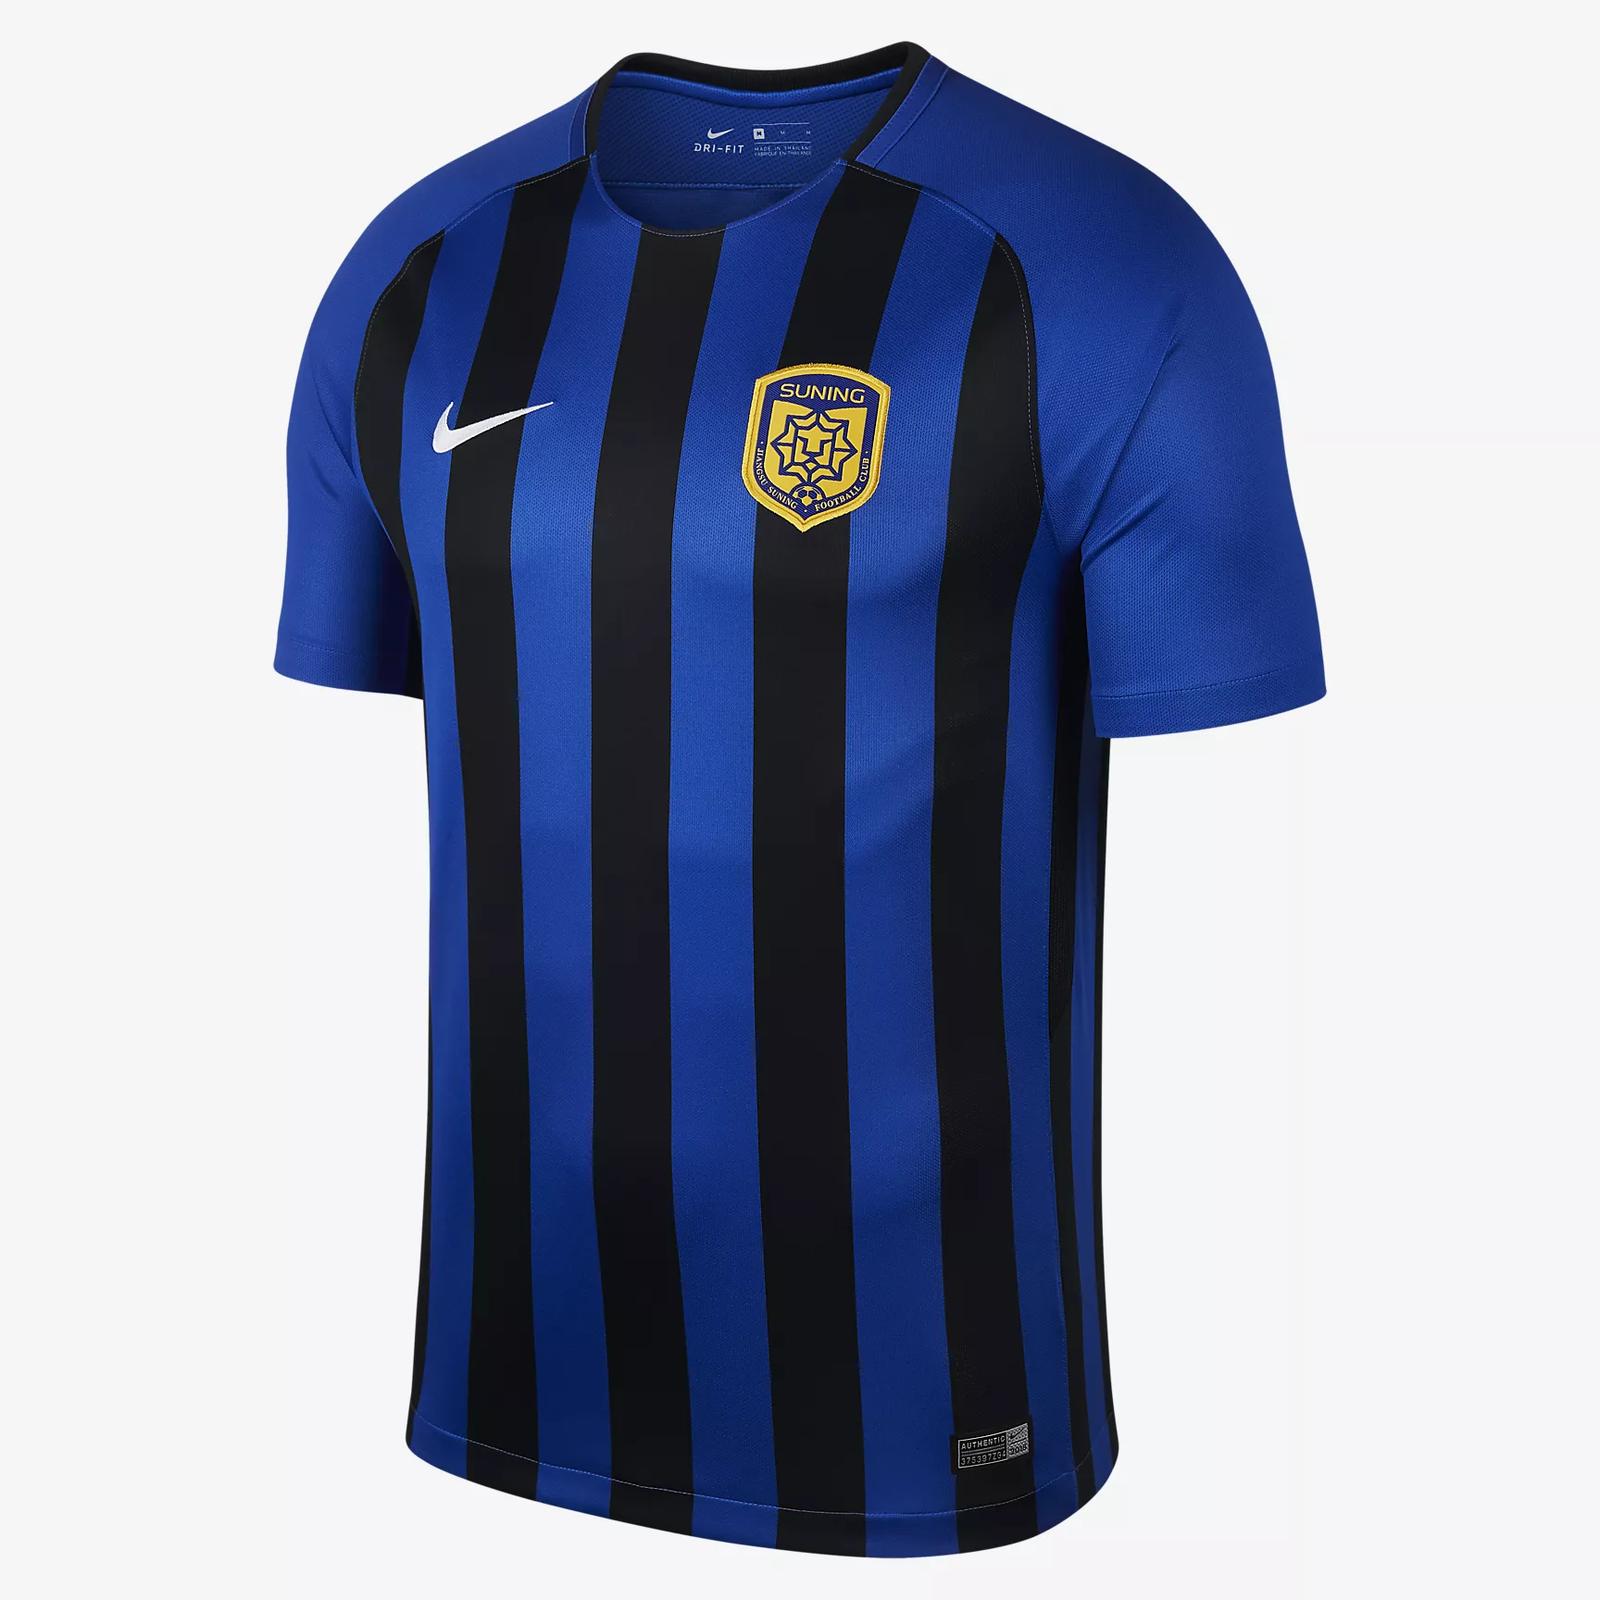 Nike Chinese Super League 2018 Kits Released - Footy Headlines